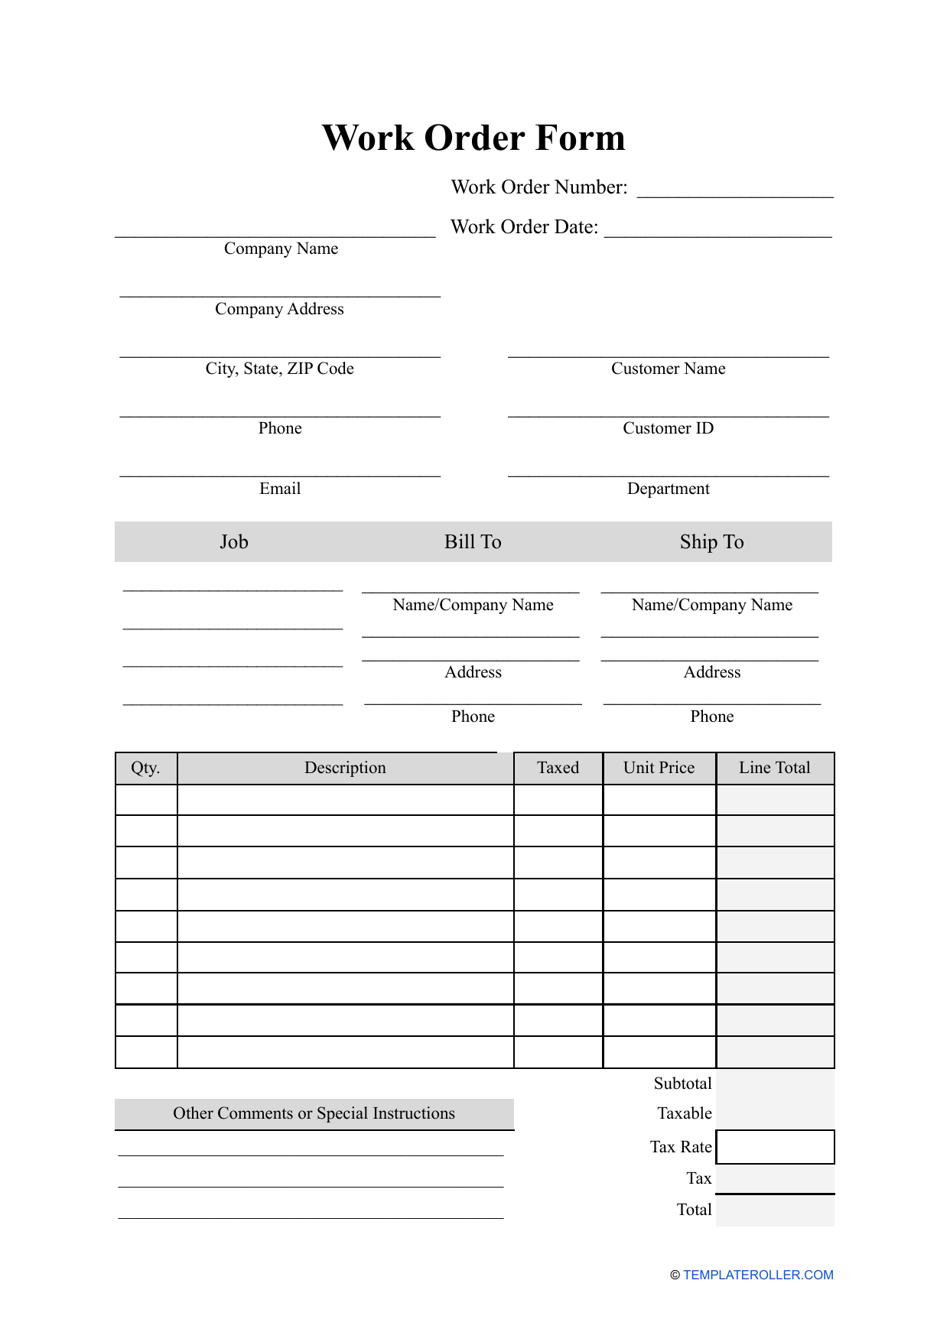 Work Order Form Template, Page 1